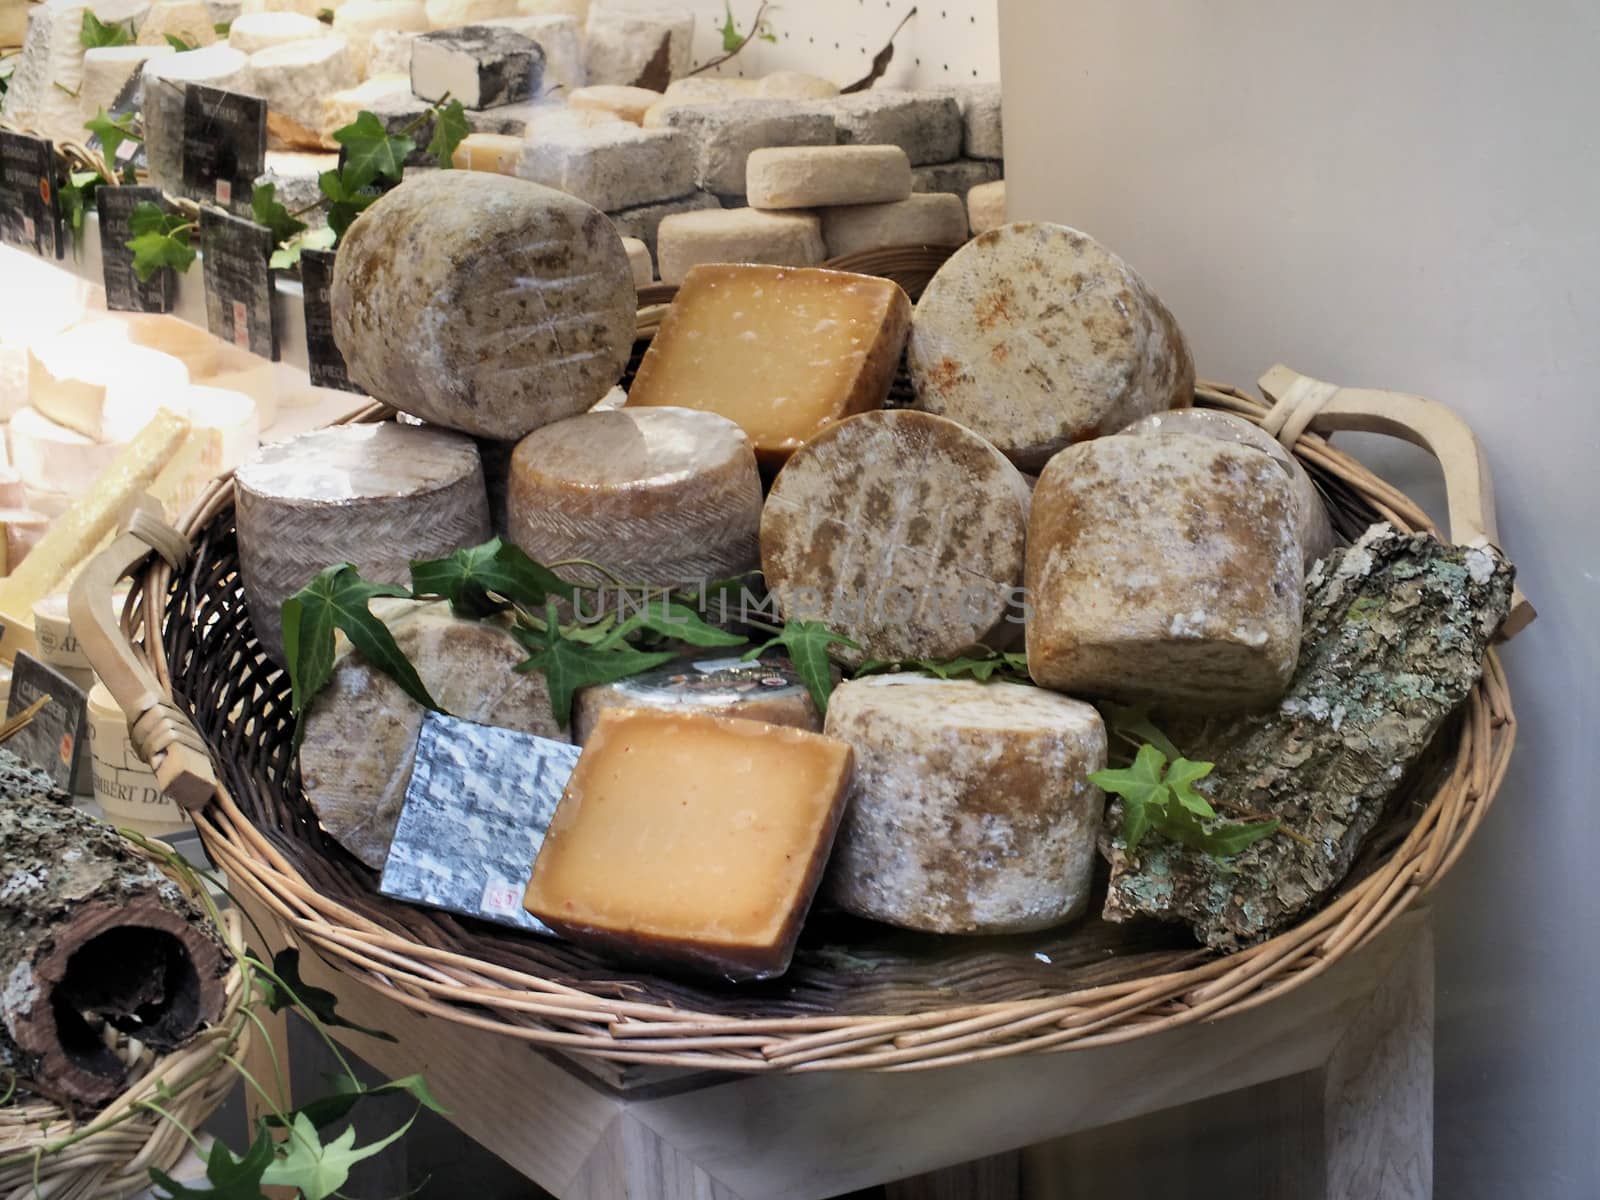 Various cheeses on display at a Parisian fromagerie (cheese shop).